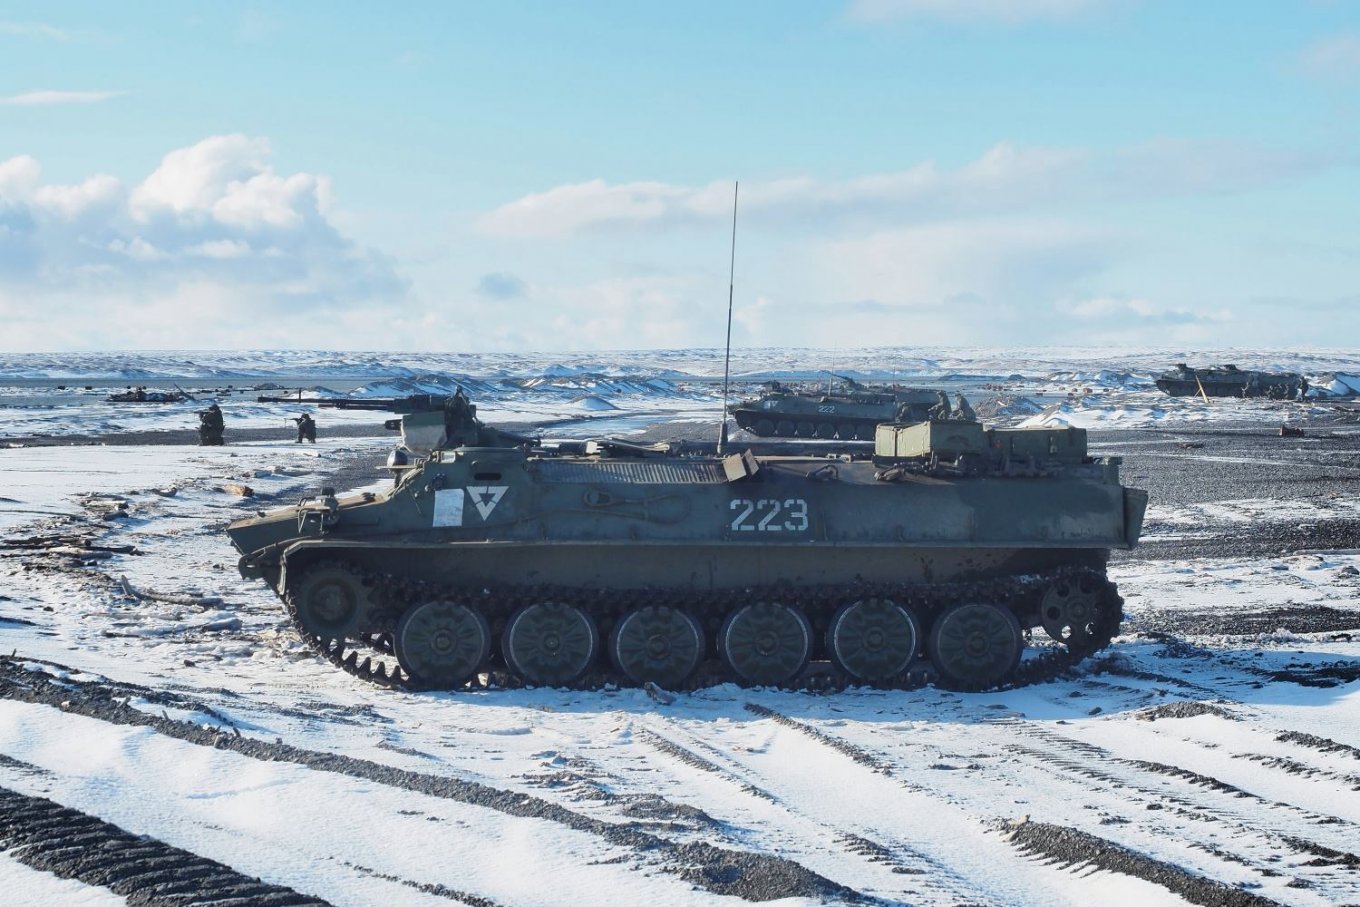 MT-LB in service with russian army